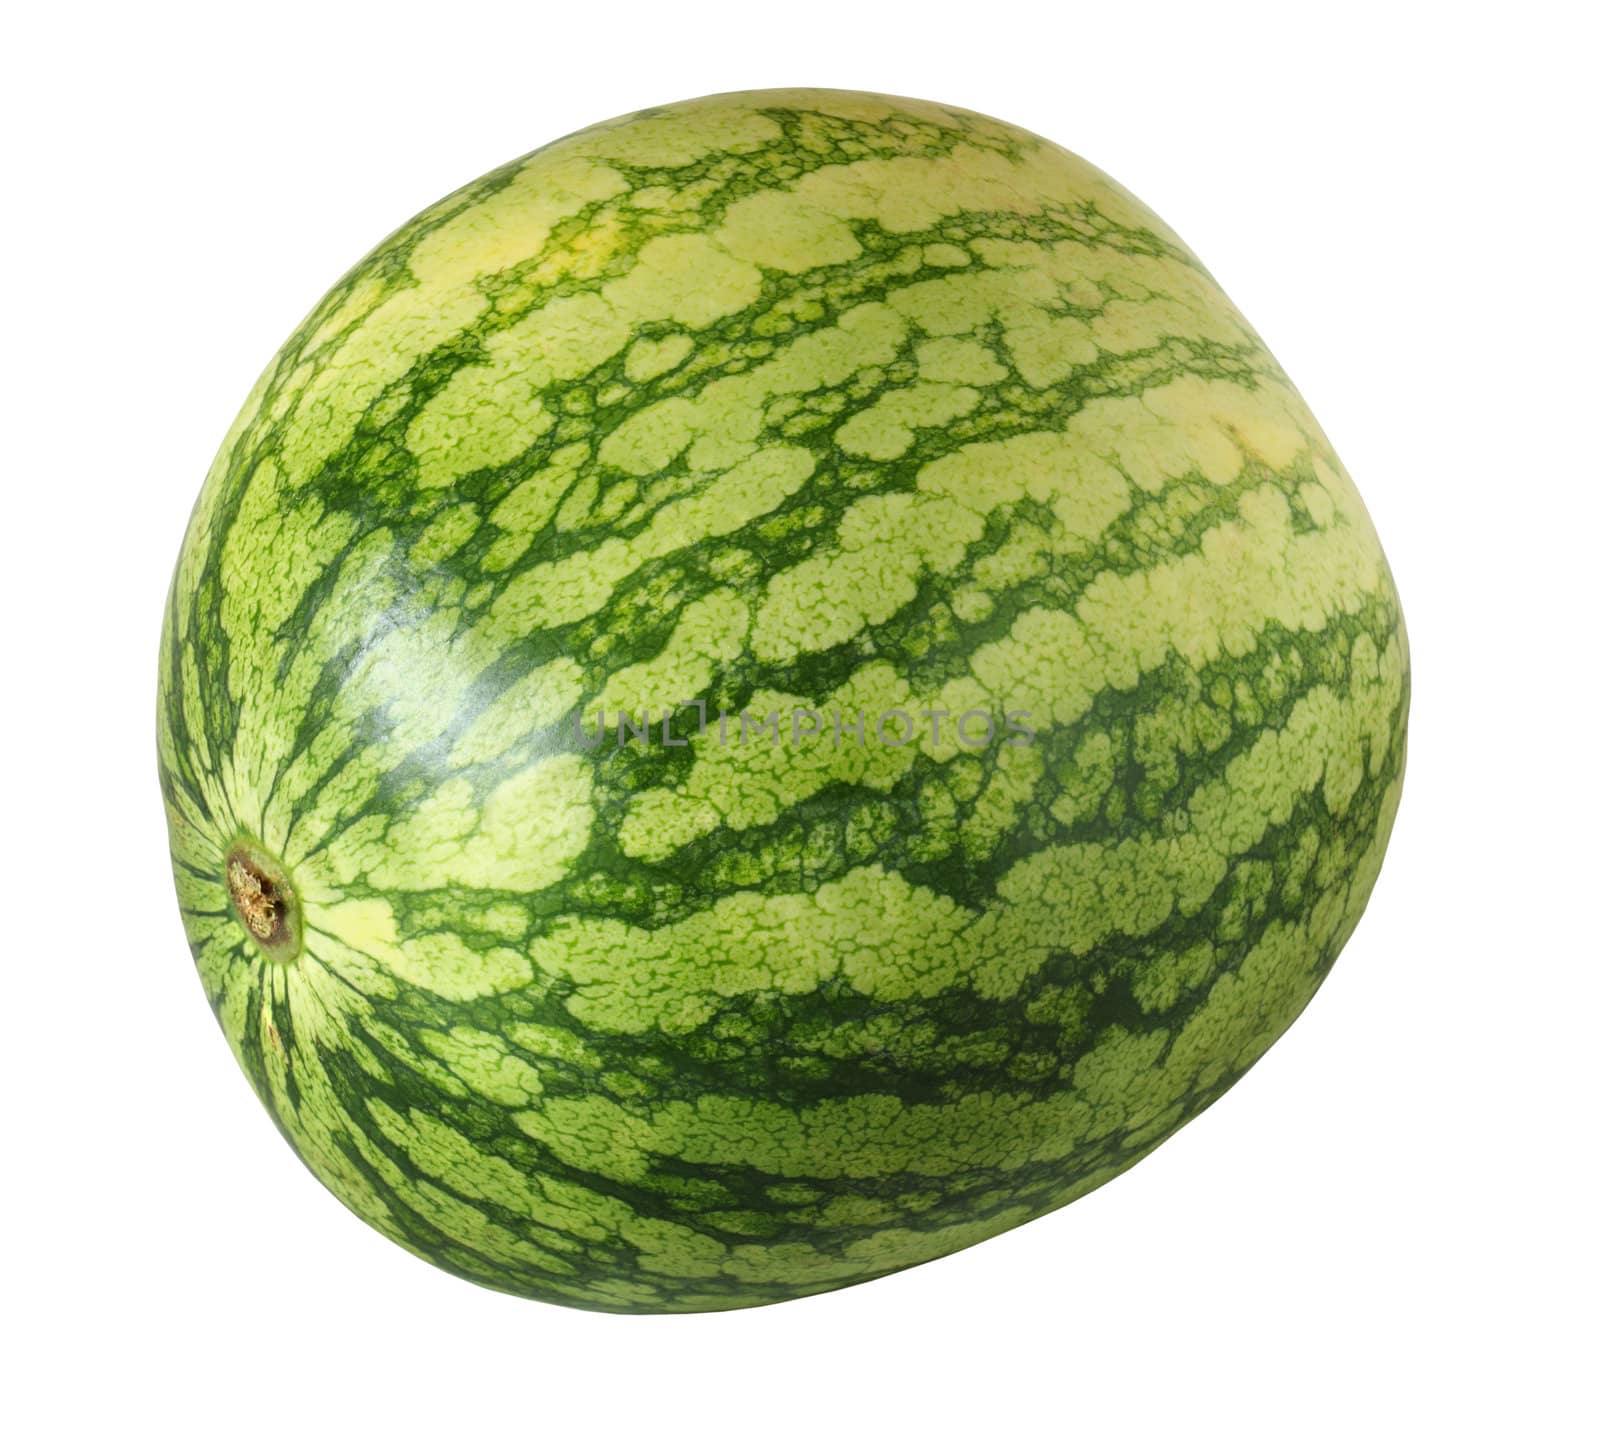 A Watermelon, isolated on white